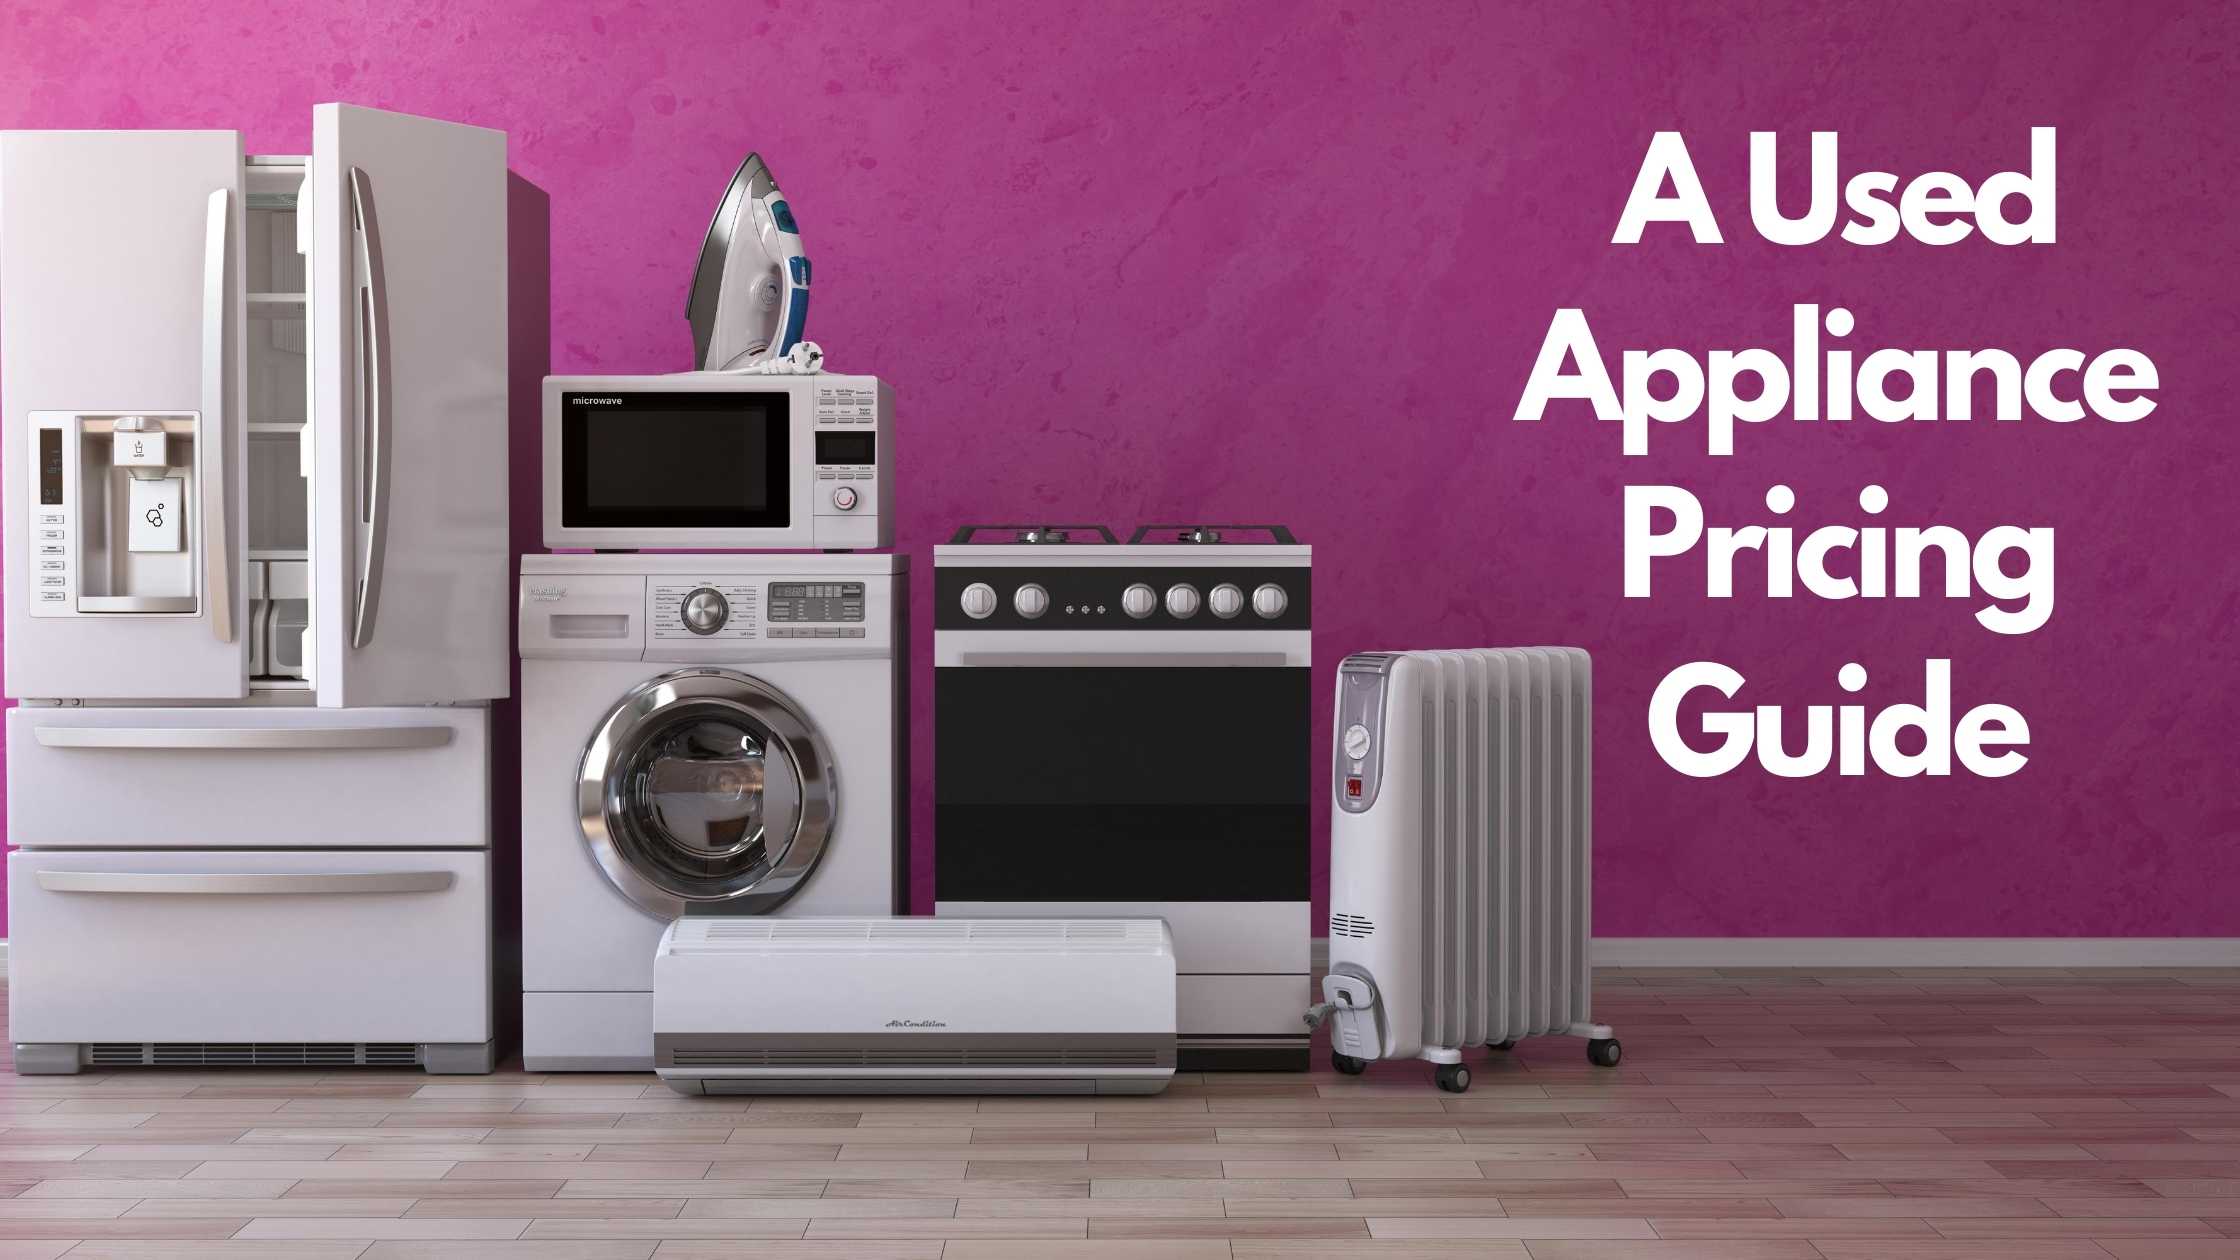 A Used Appliance Pricing Guide Sheepbuy Blog